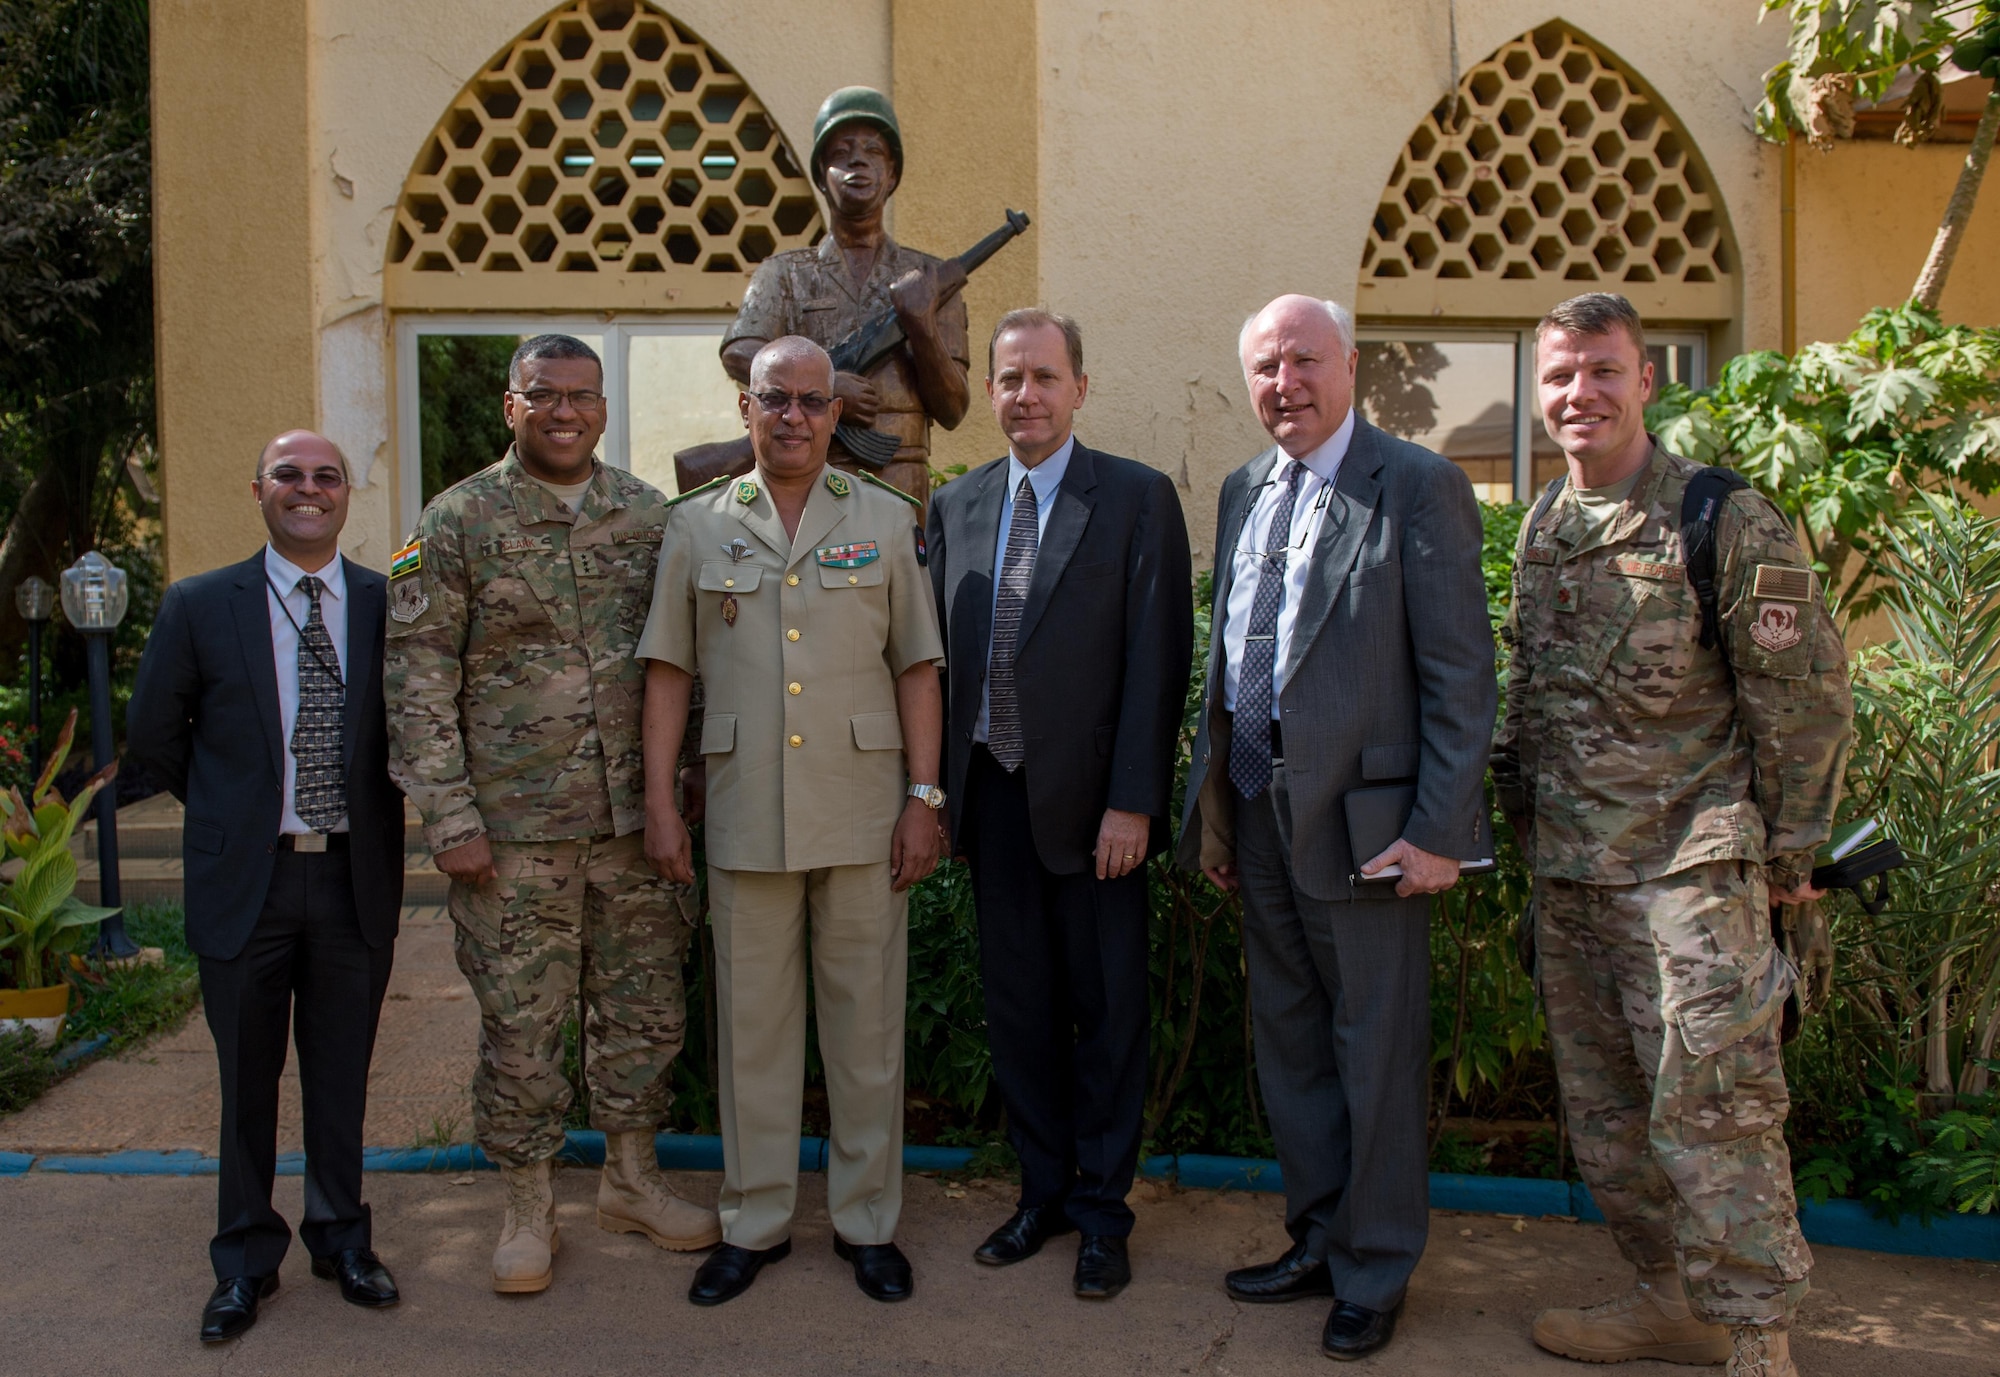 Lt. Gen. Richard Clark, 17th Expeditionary Air Force commander, poses for a photo with the deputy chief of defense for Niger during a visit to Niamey, Niger, Nov. 23, 2016. During a three day trip, Clark visited Airmen in Europe and Africa who support the Air Force's intelligence, surveillance and reconnaissance mission. This was Clark's first visit to NAS Sigonella, Niamey and Agadez as 17th Expeditionary Air Force commander. (U.S. Air Force photo by Tech. Sgt. Ryan Crane)